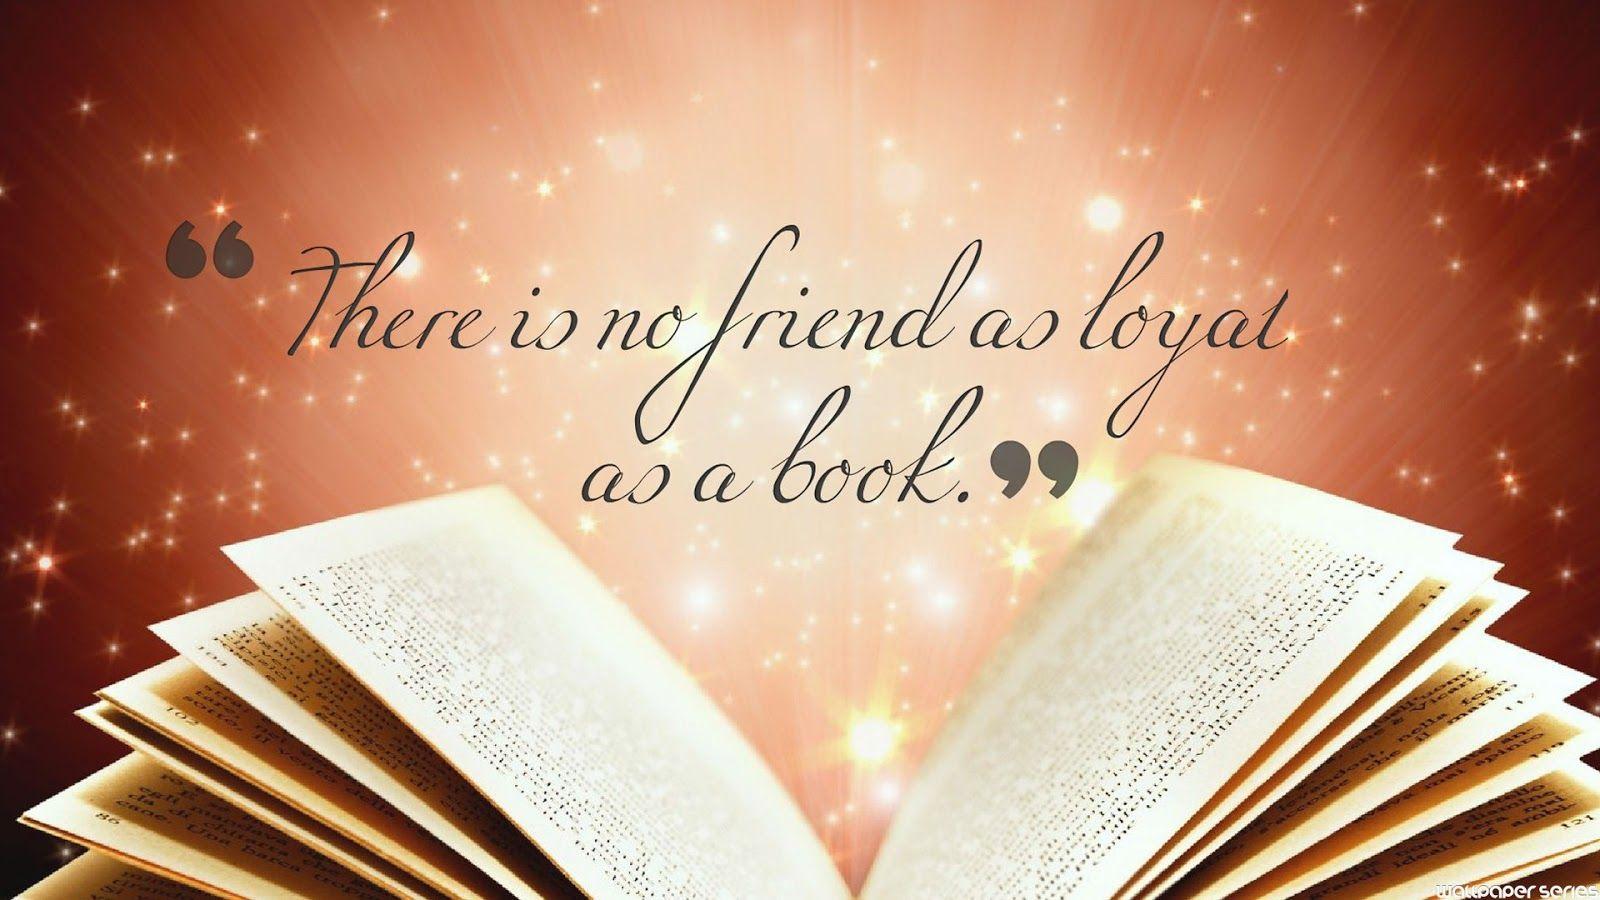 Download Love Quotes In Books Background